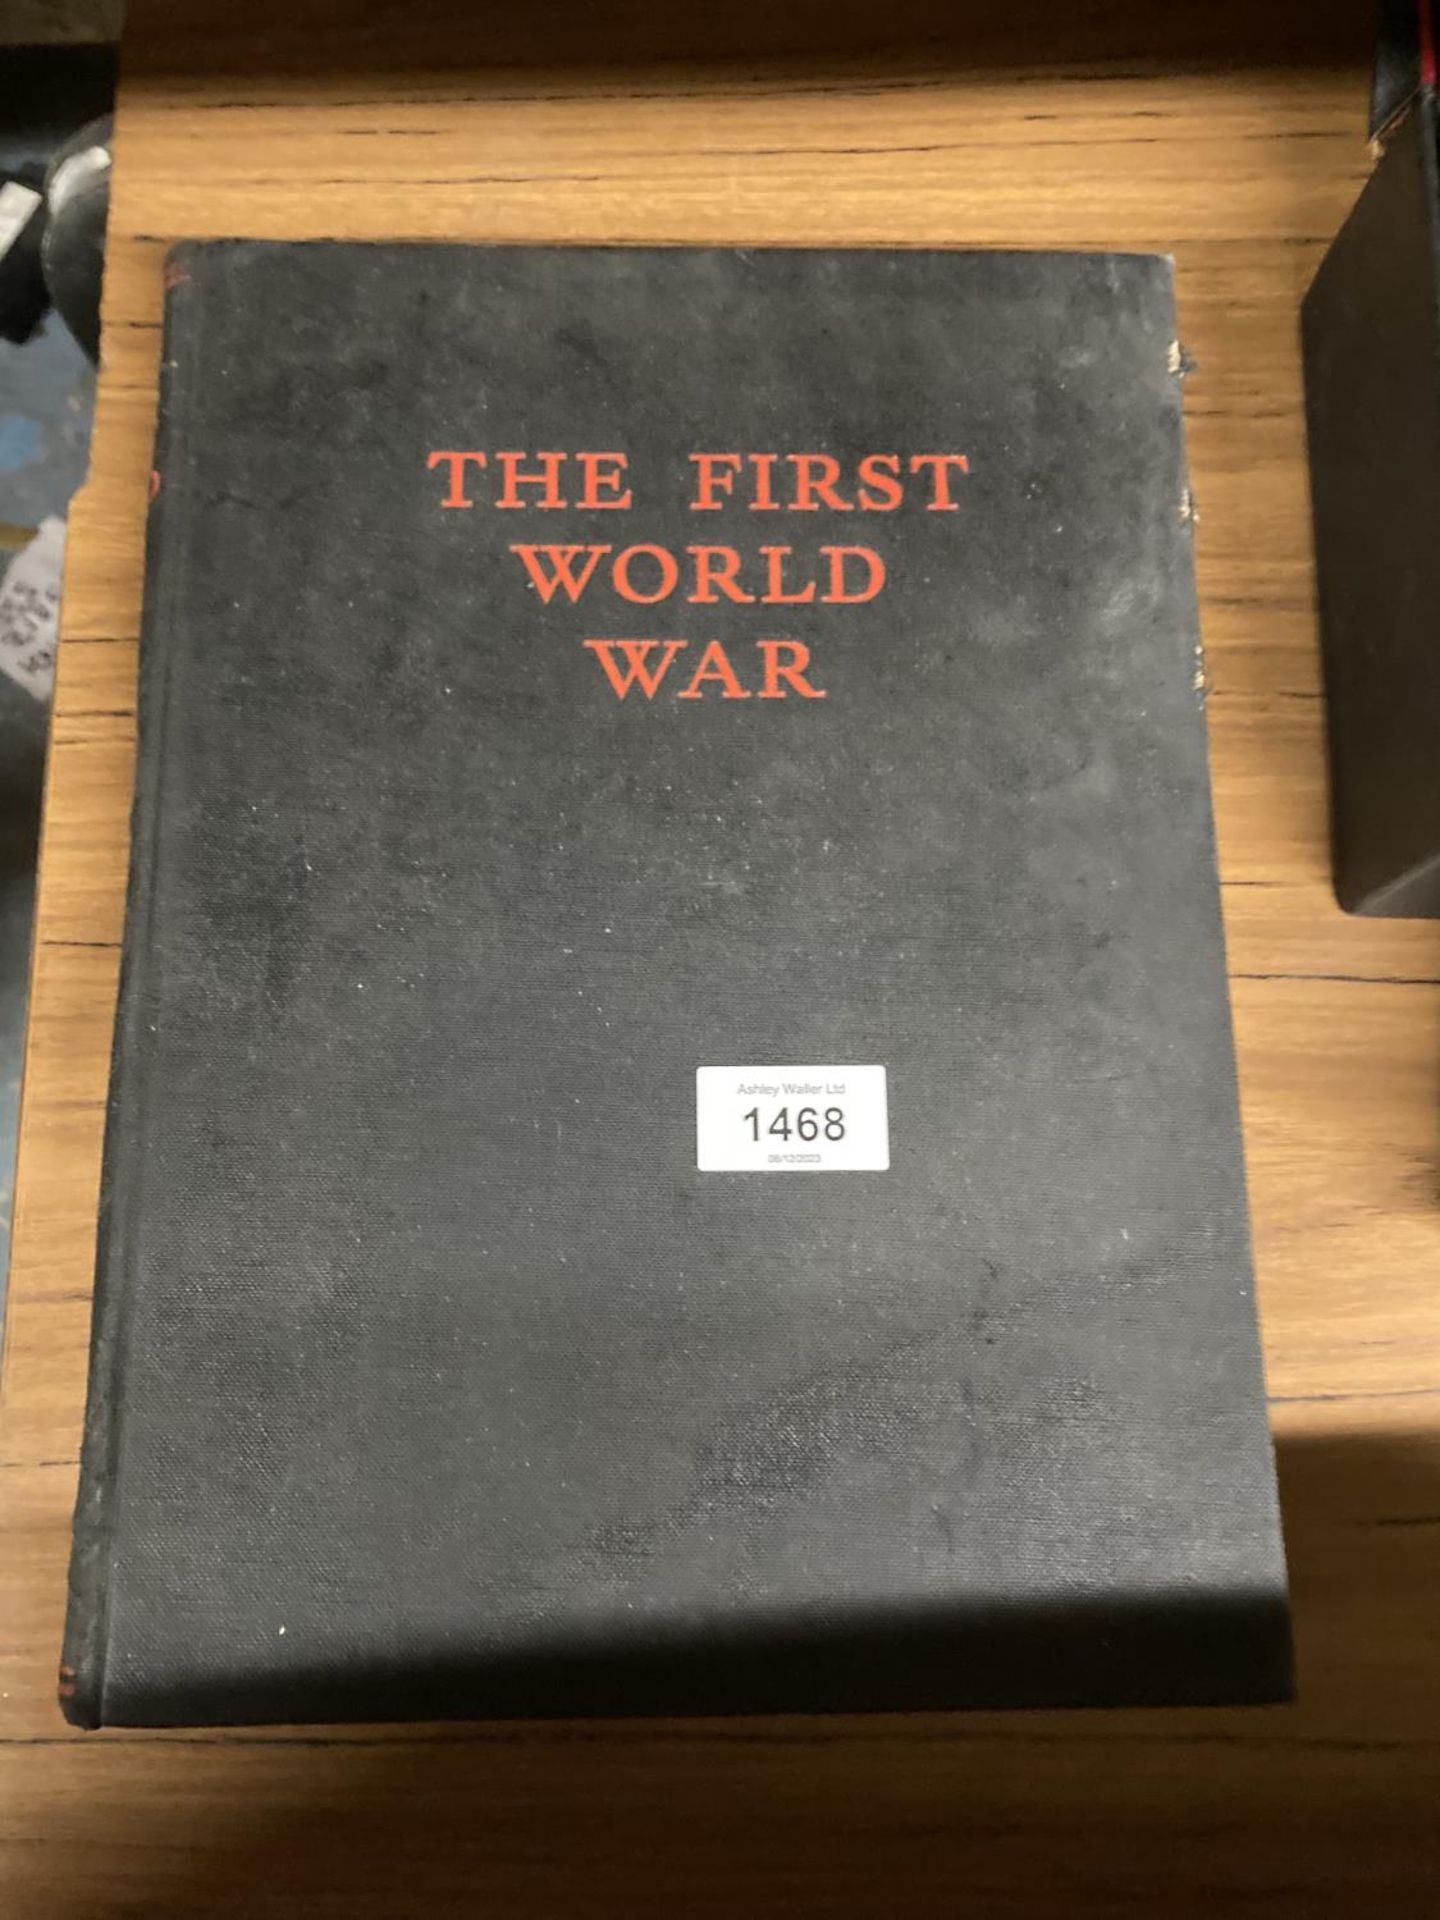 A VINTAGE 'THE FIRST WORLD WAR' BOOK, FIRST PUBLISHED IN 1933